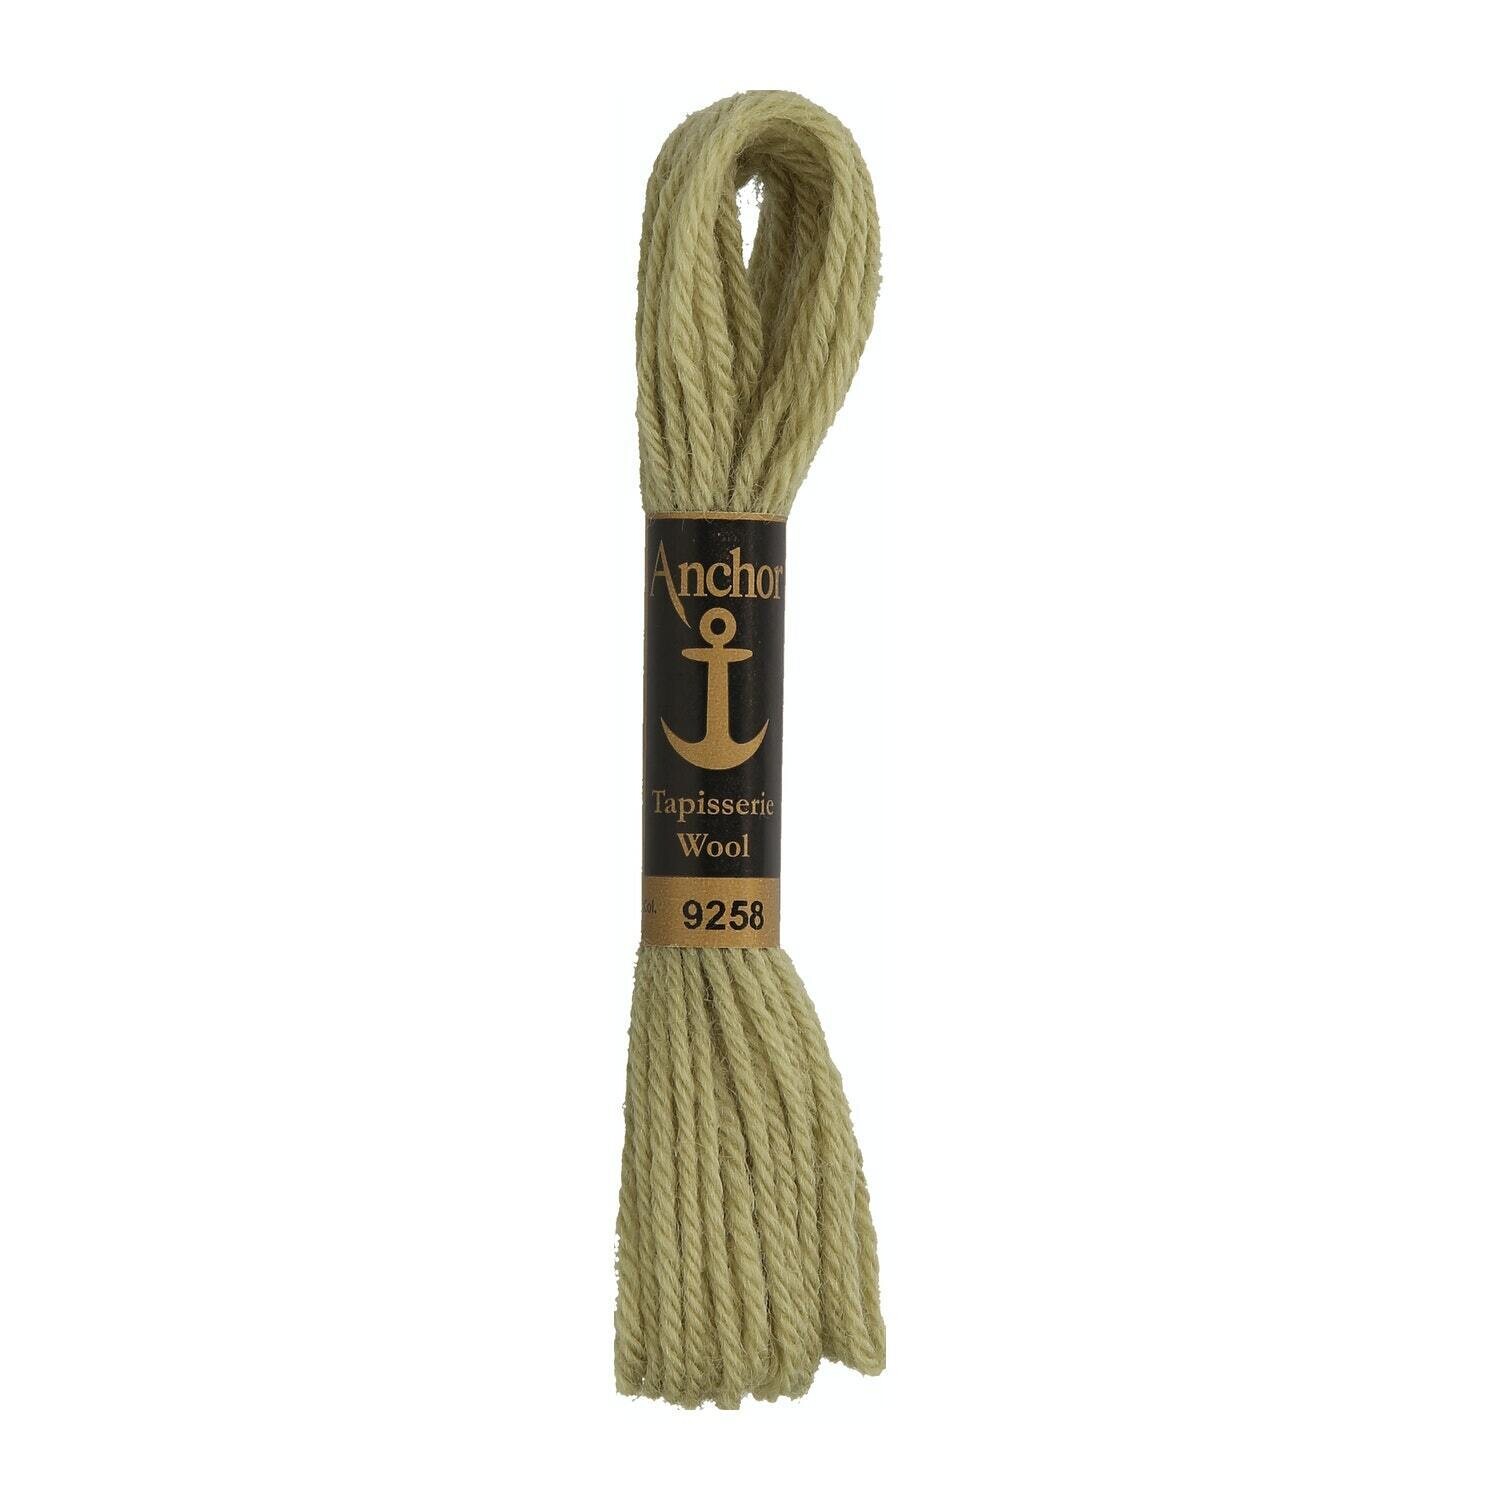 Anchor Tapisserie Wool #09258